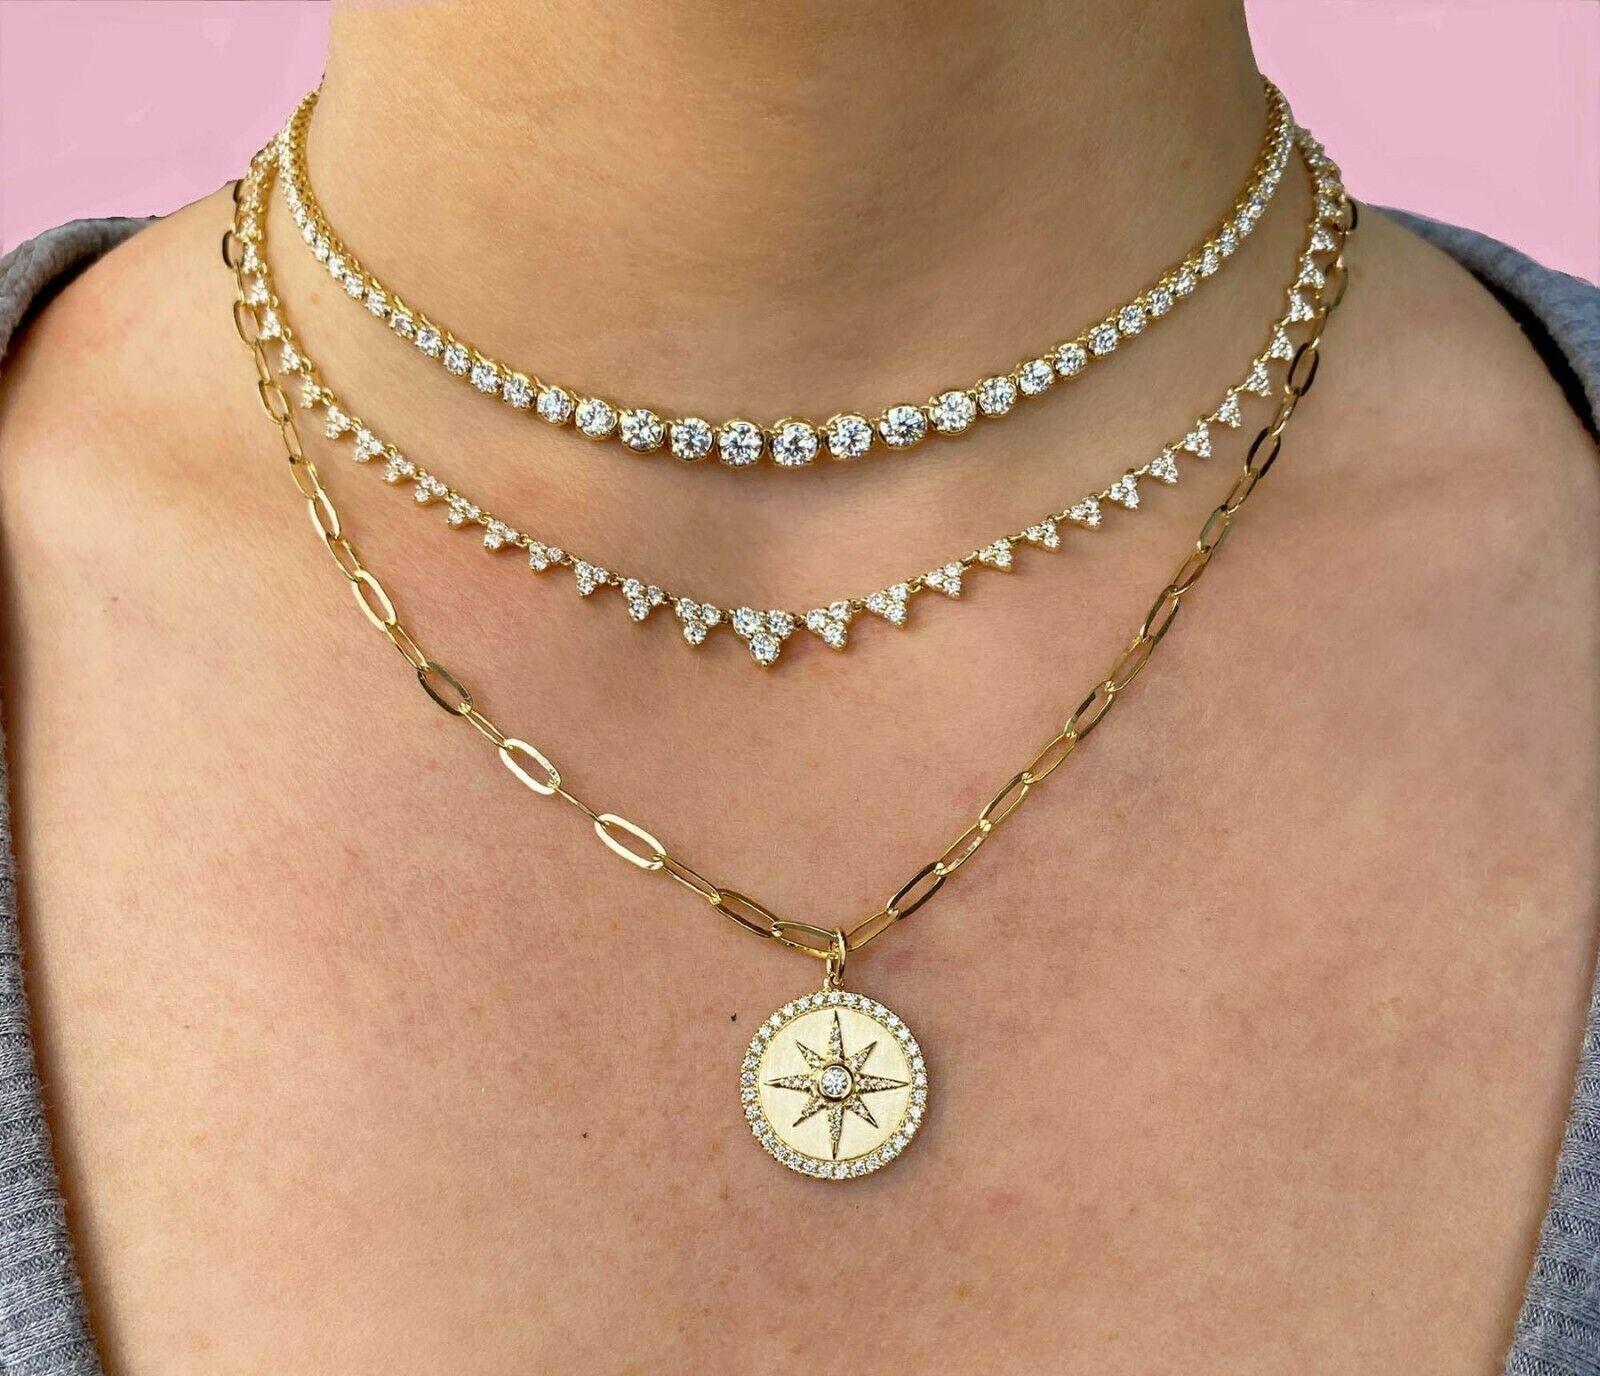 Diamond (4.08 total carat weight) tennis necklace in 14k yellow gold. The necklace is designed and handmade locally in Los Angeles by Sage Designs L.A. using earth-mined and conflict free diamonds. The necklace is 18 inches long with an adjustable